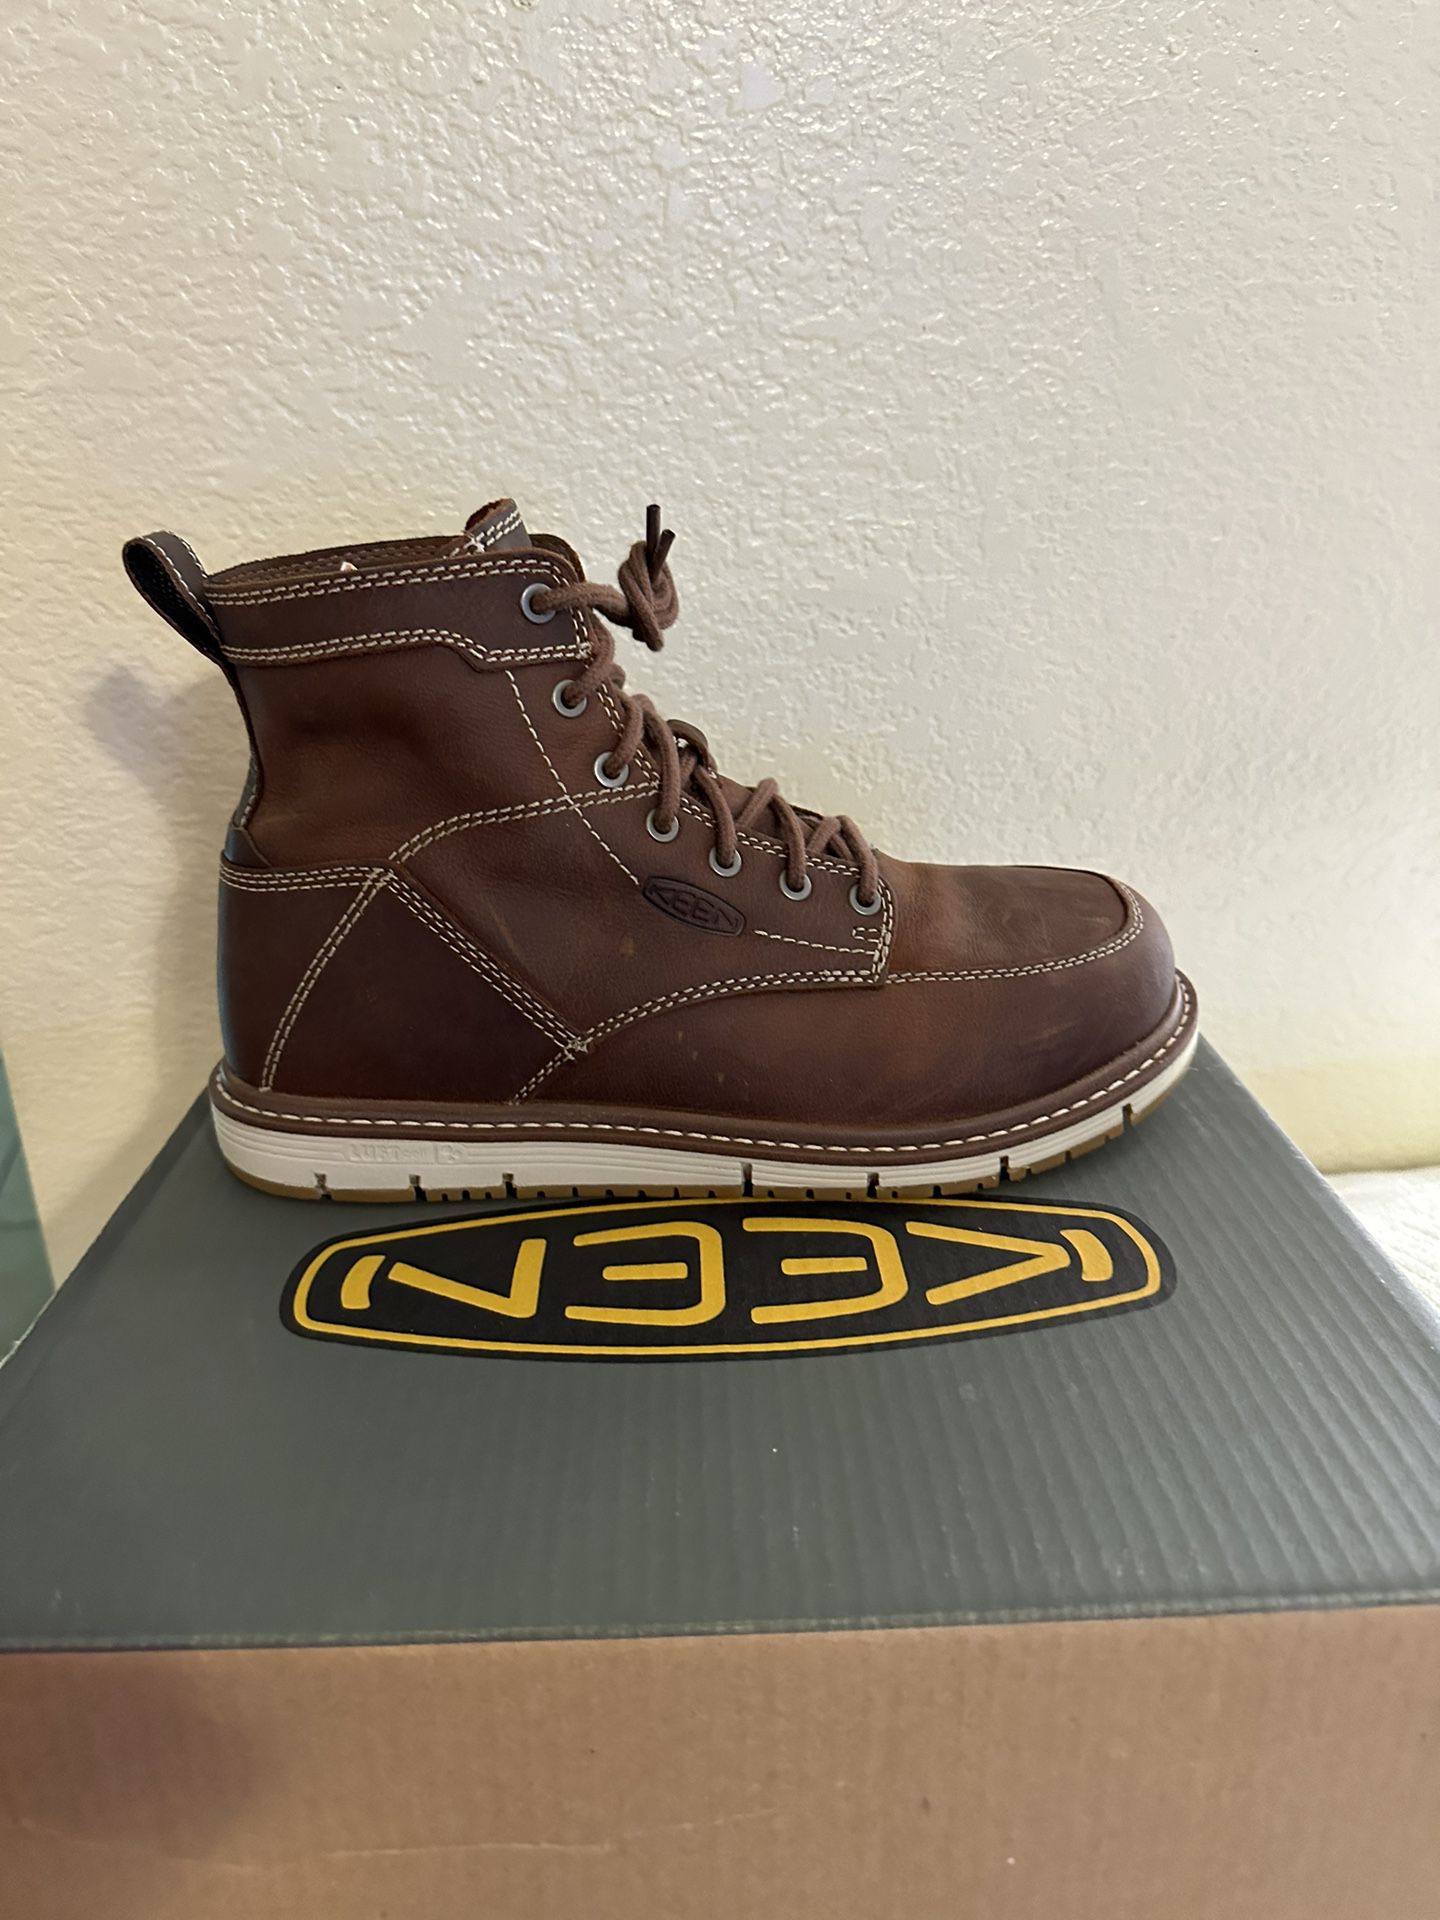 Boots Keen Size 8.5 